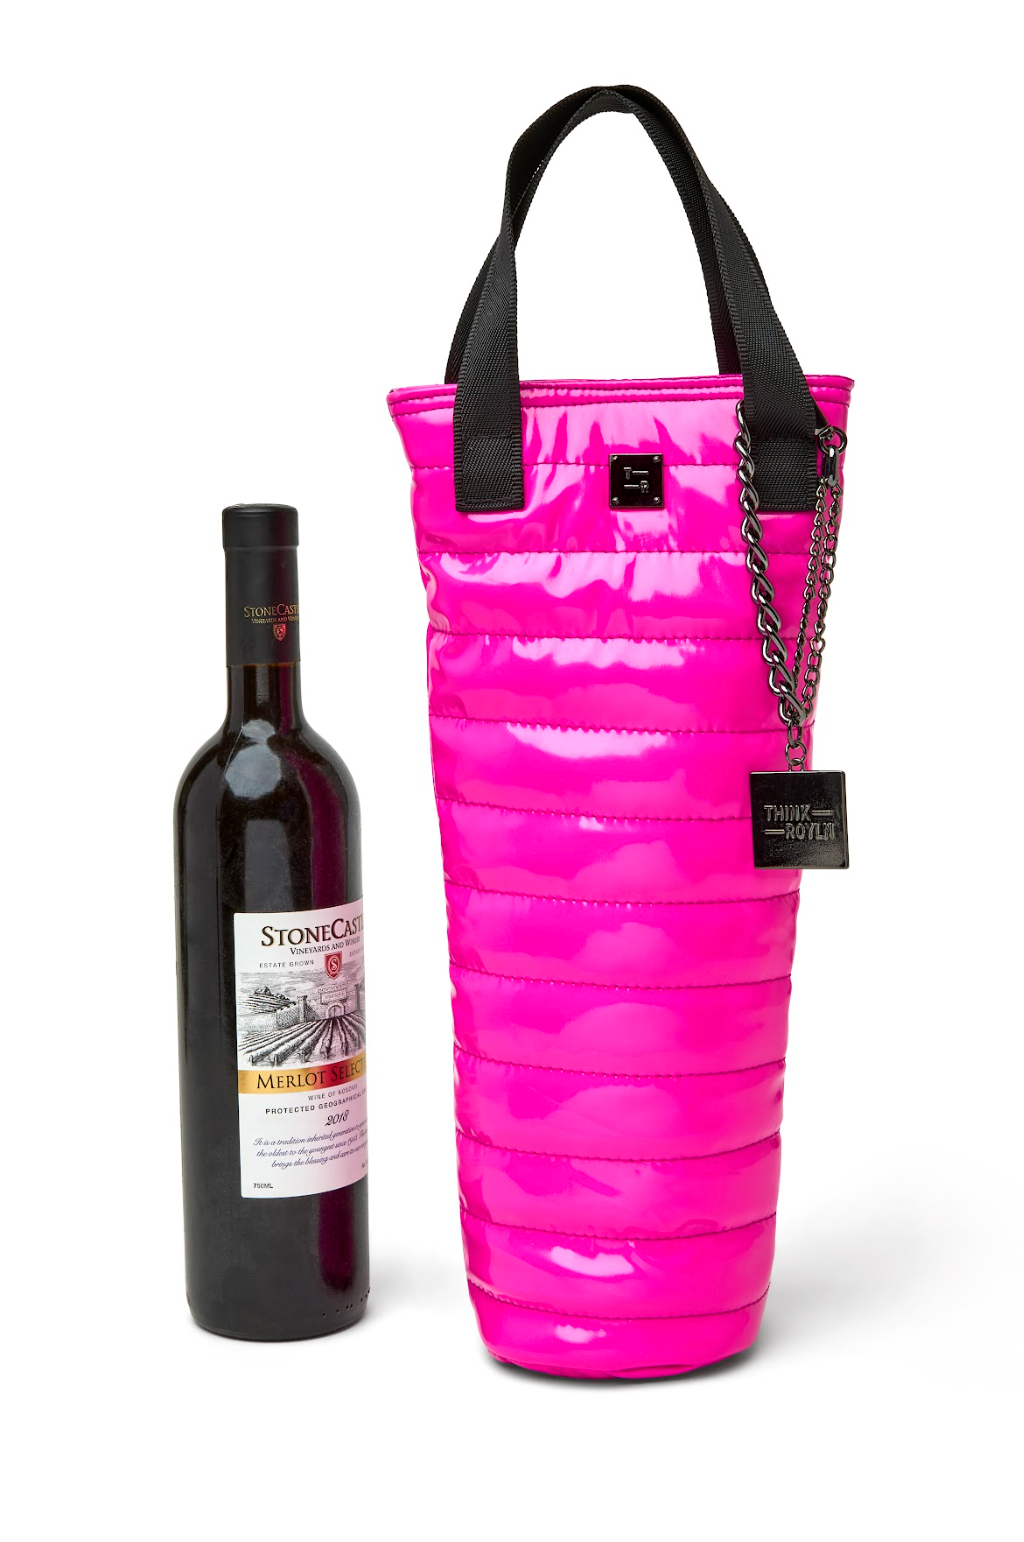 Think Royln Absolutely Fabulous Wine Cooler - Sizzling Pink Patent